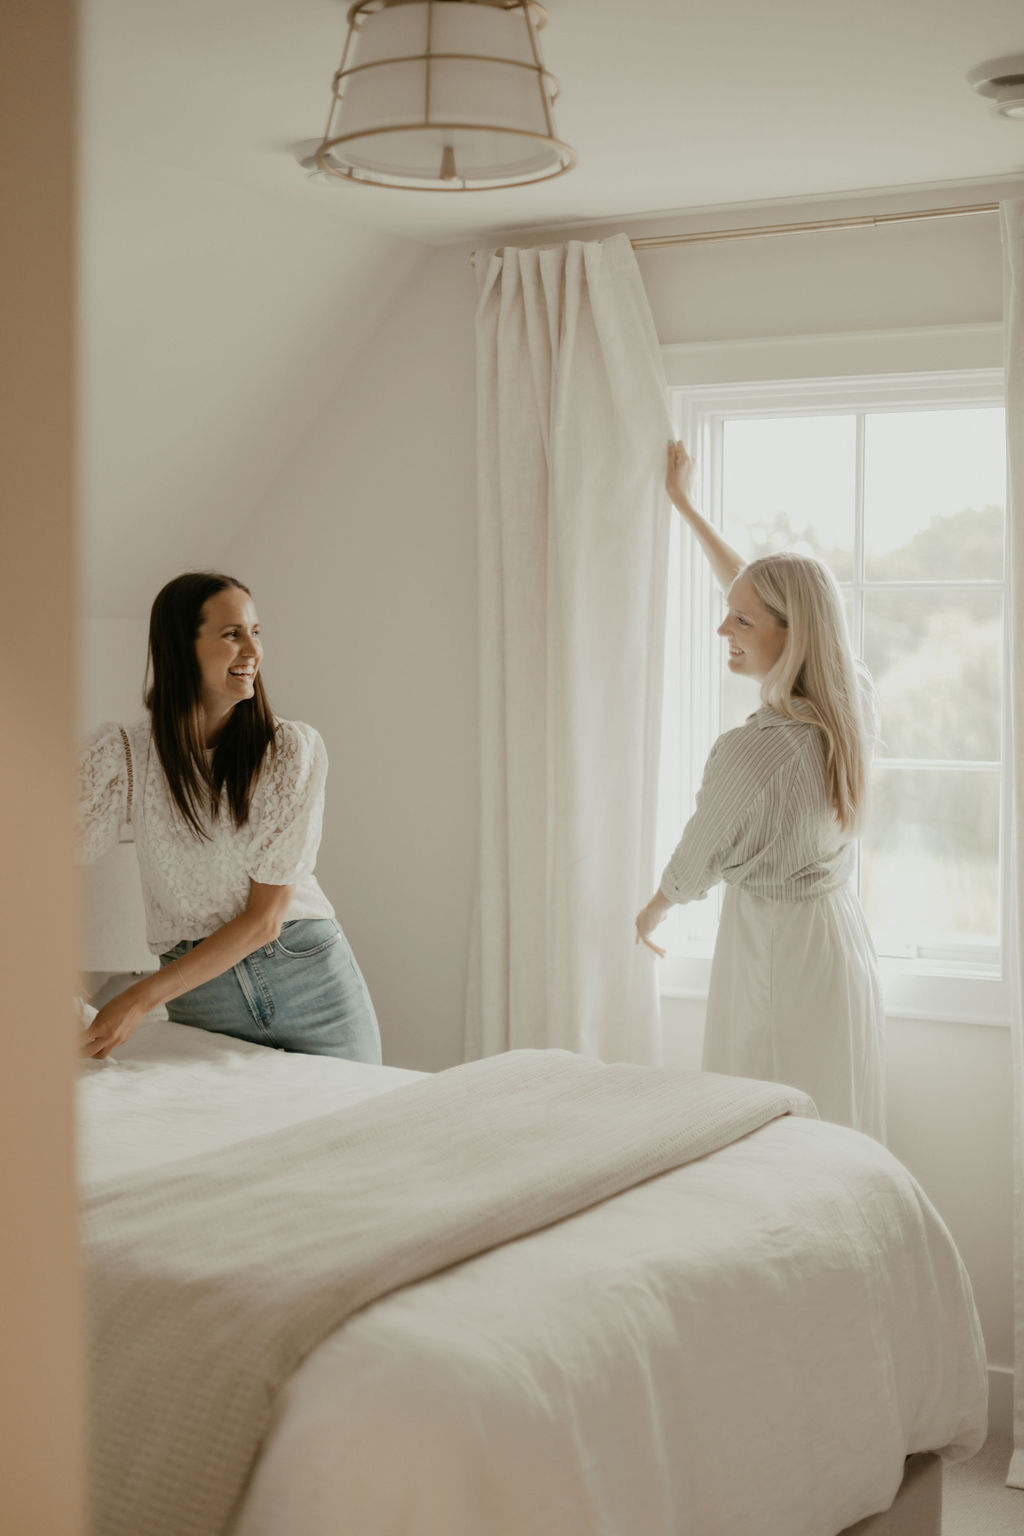 Two women in a bedroom primping the bedding and curtains